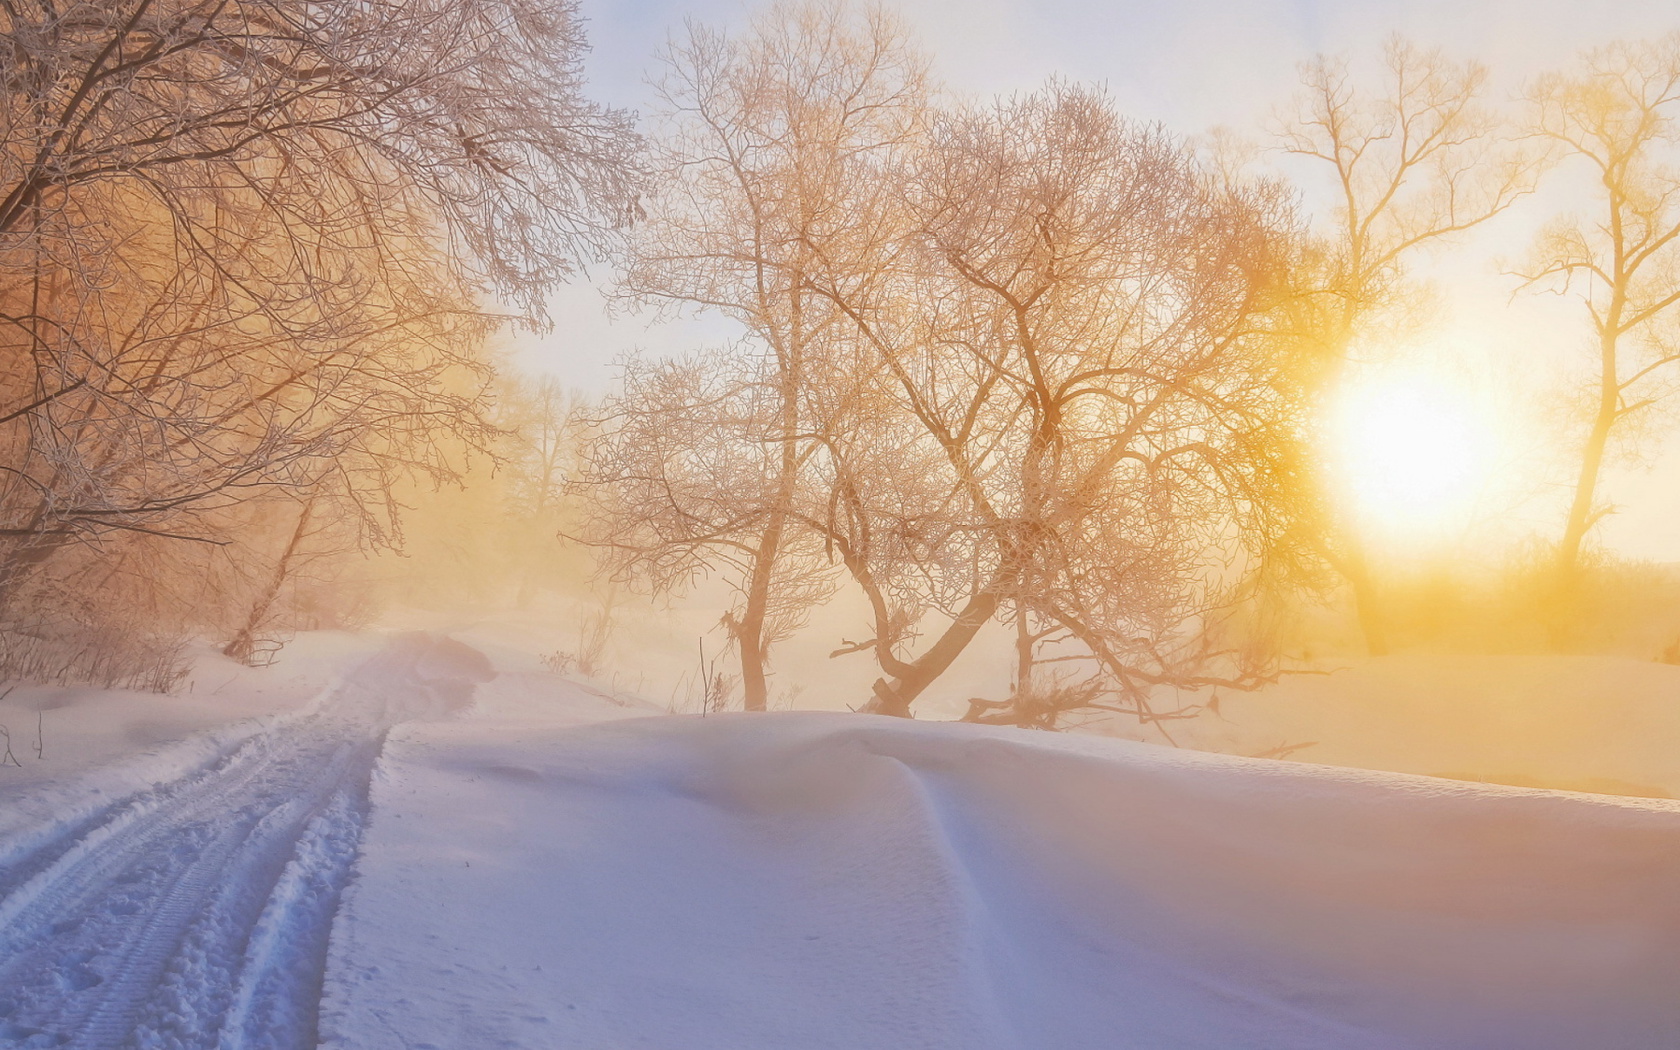 Morning in winter forest wallpaper 1680x1050